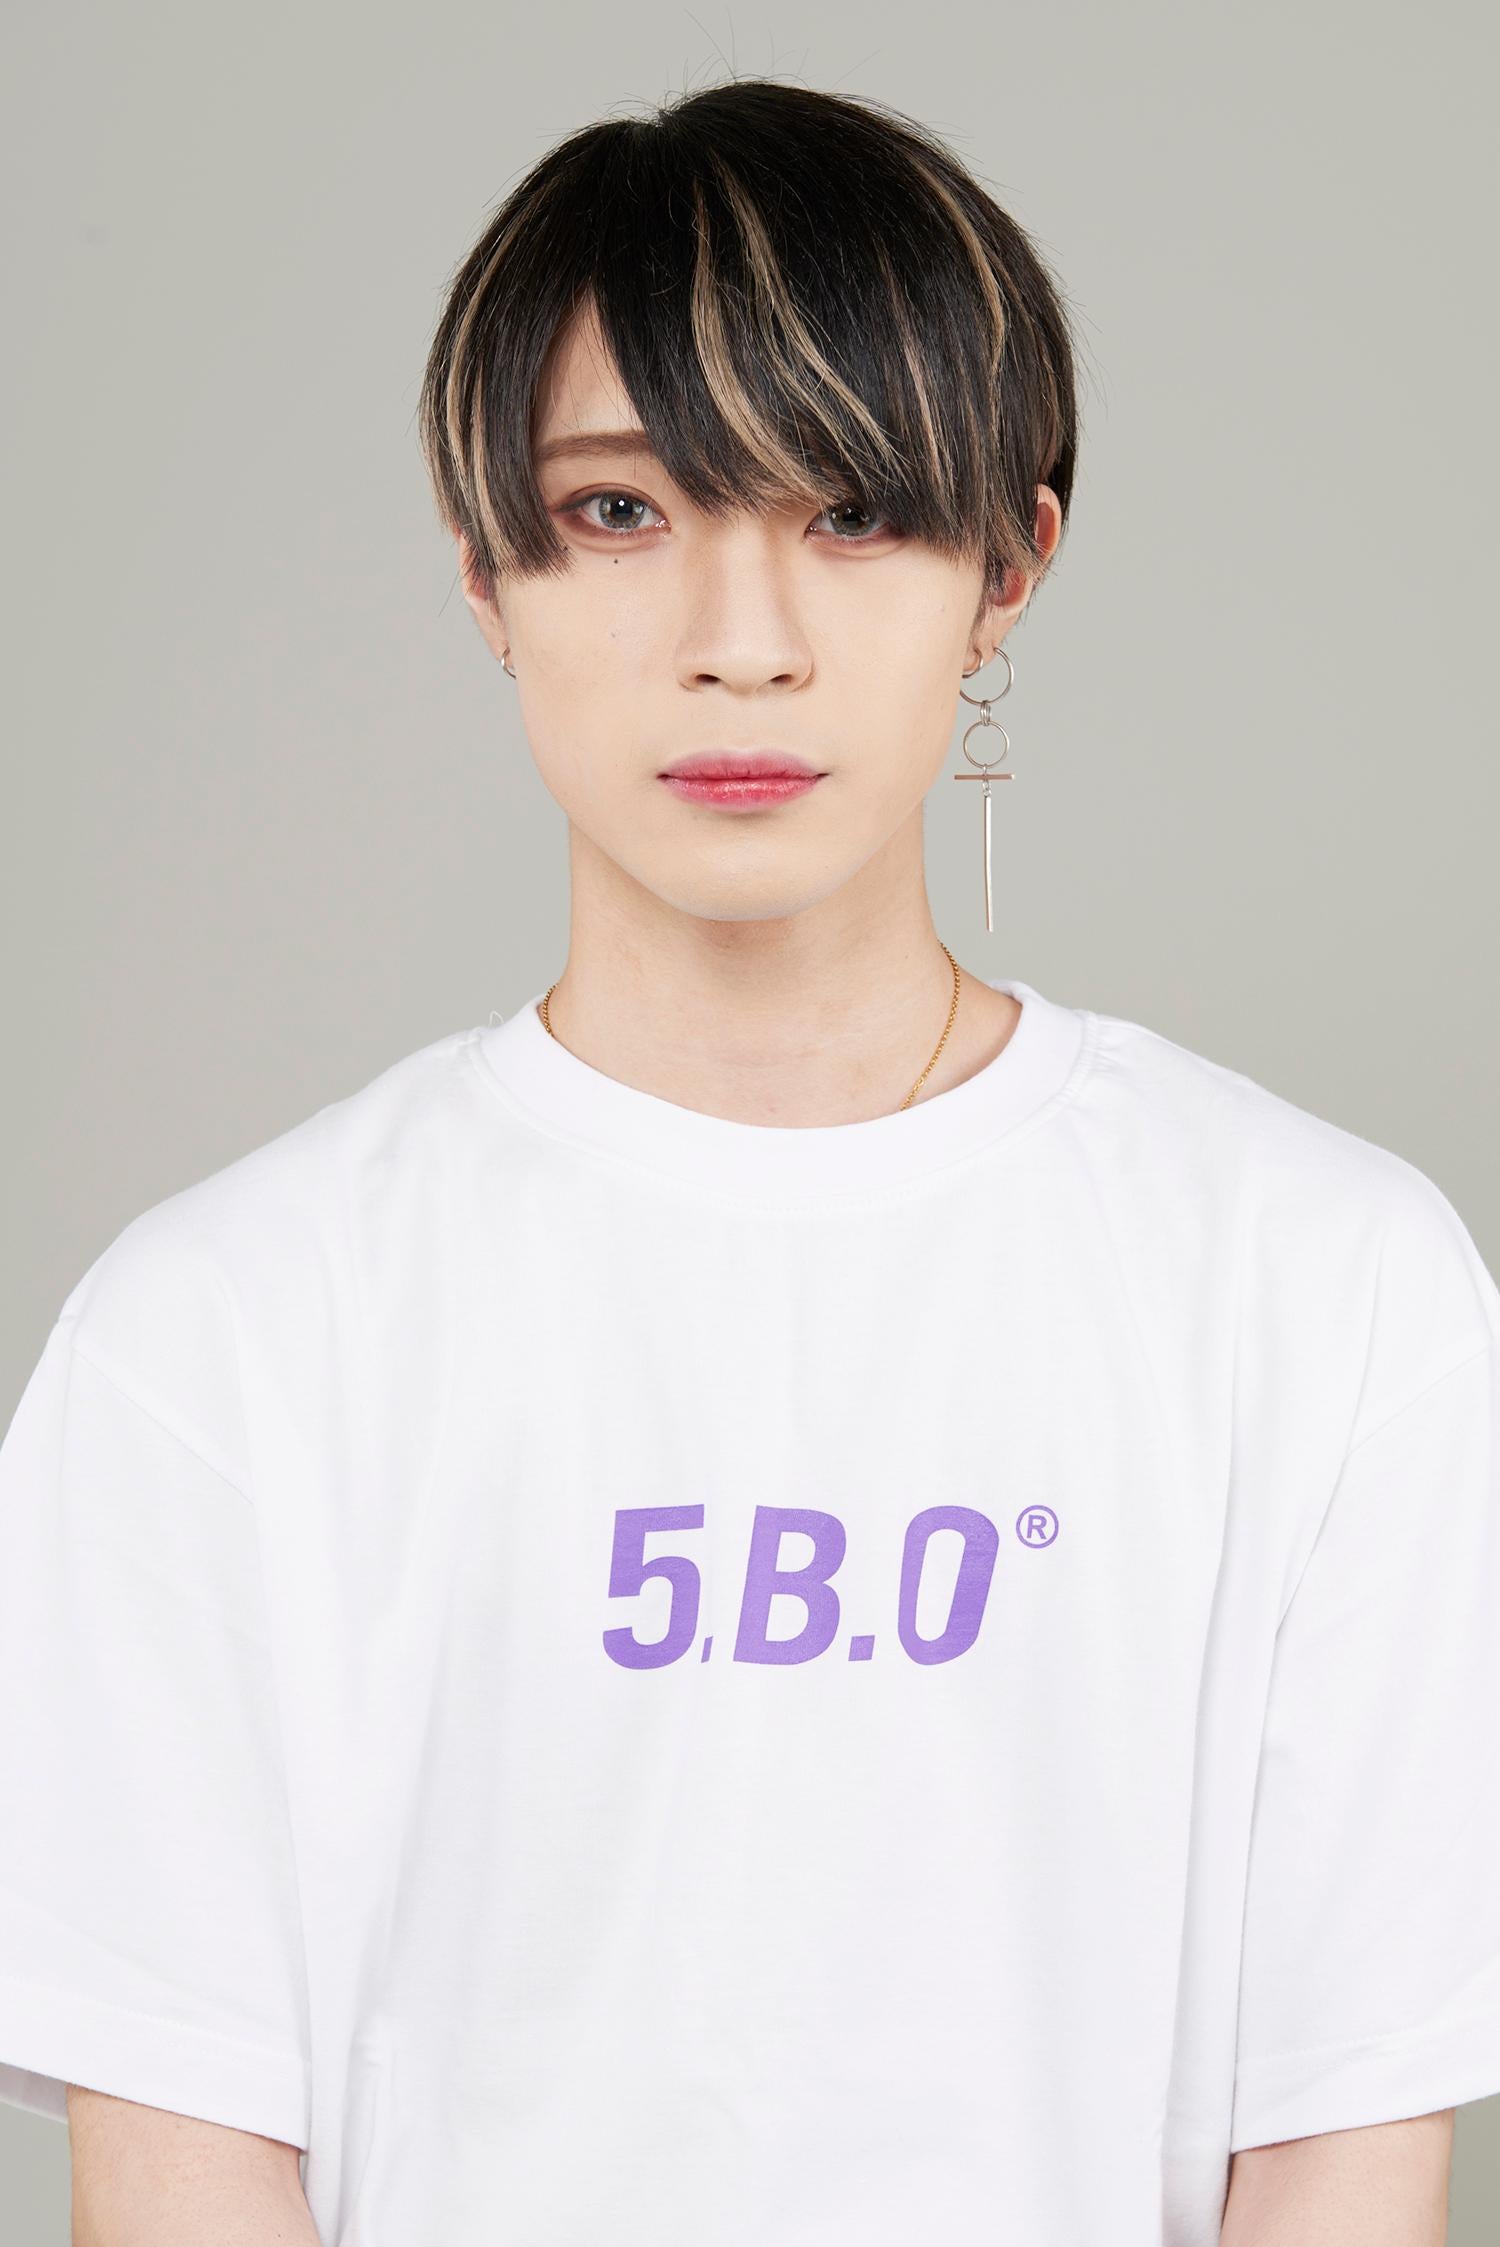 Corinne Mariaud Color Photograph - TOYA-TOKYO - from the FLOWER BEAUTY BOYS Series